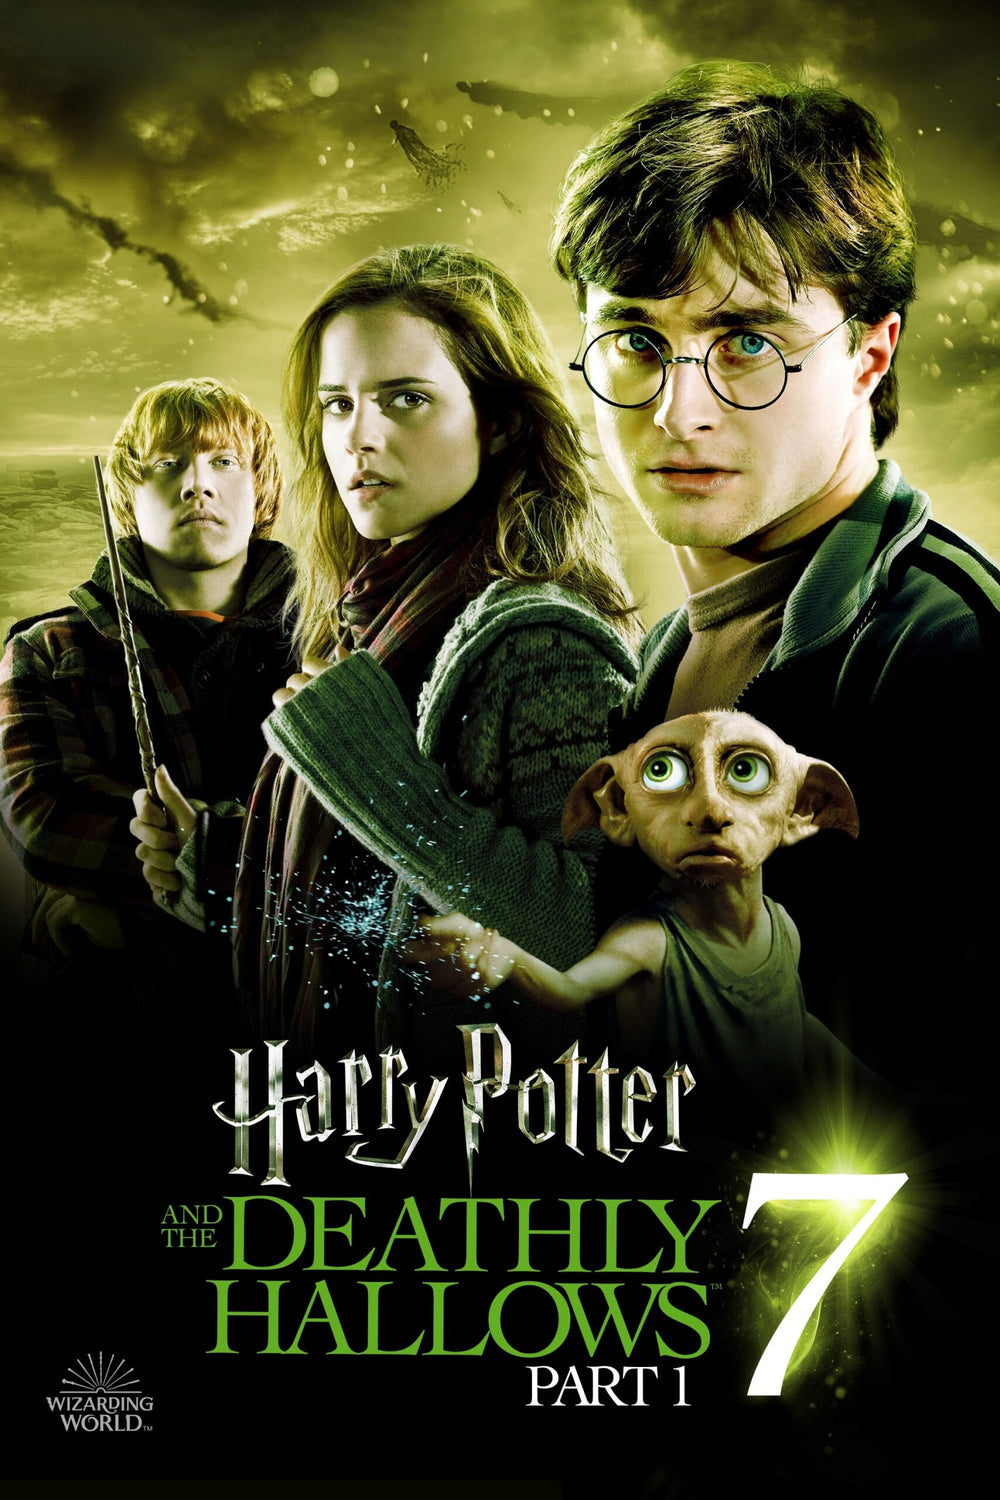 HARRY POTTER AND THE DEATHLY HALLOWS PART 1 4K Vudu/iTunes Via Moviesanywhere